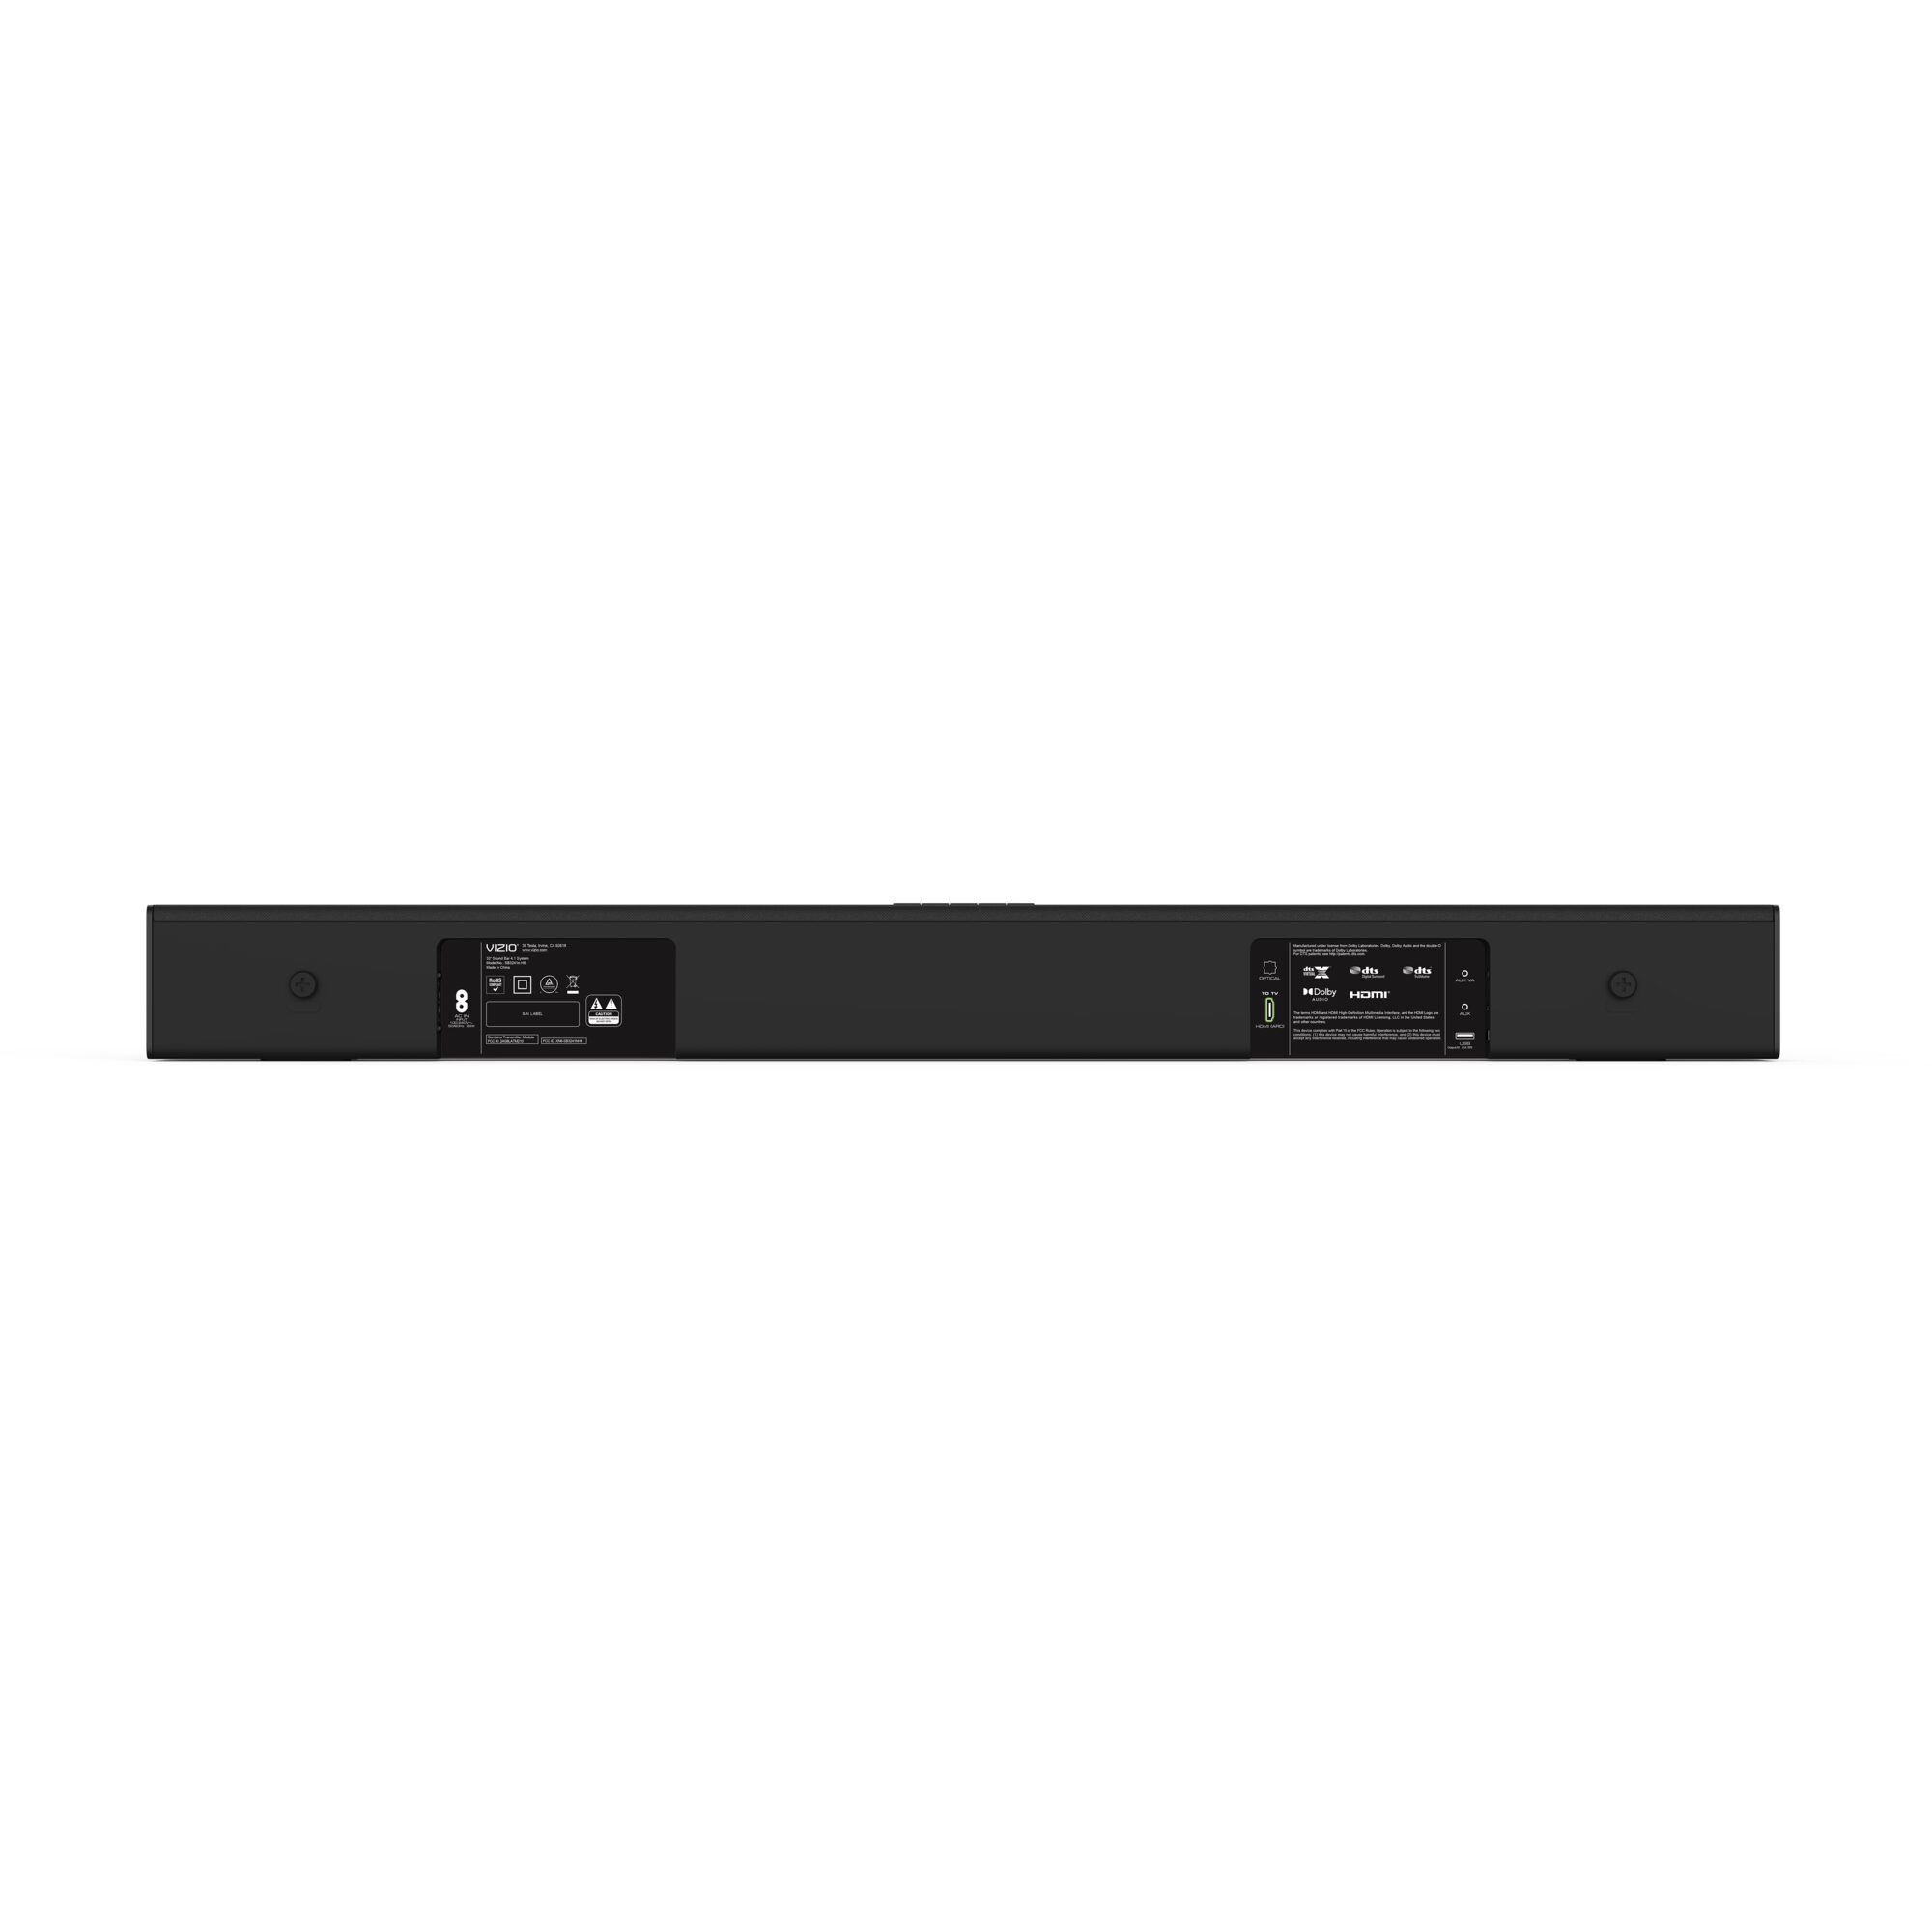 VIZIO 32" 4.1 Sound Bar with Wireless Subwoofer (SB3241n-H6) - image 5 of 15